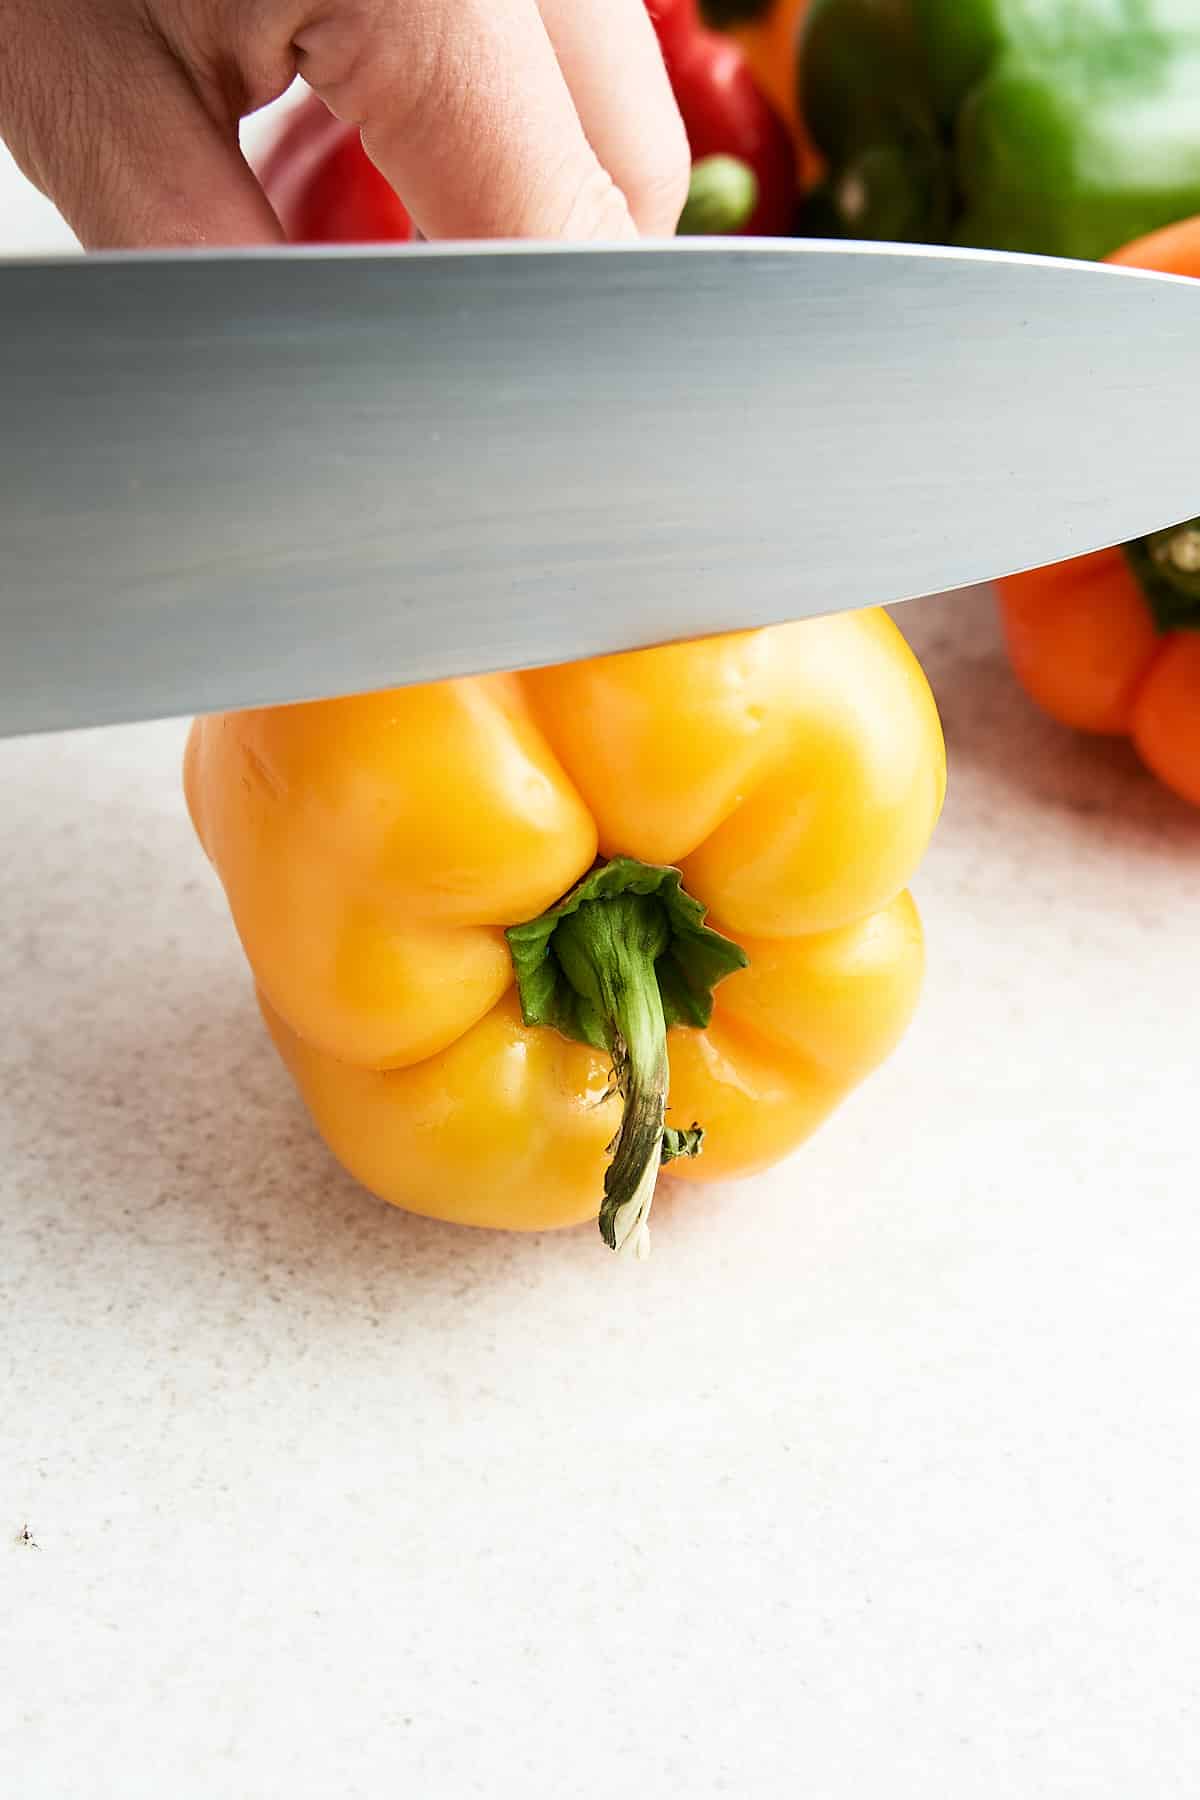 Trimming the top off a bell pepper.